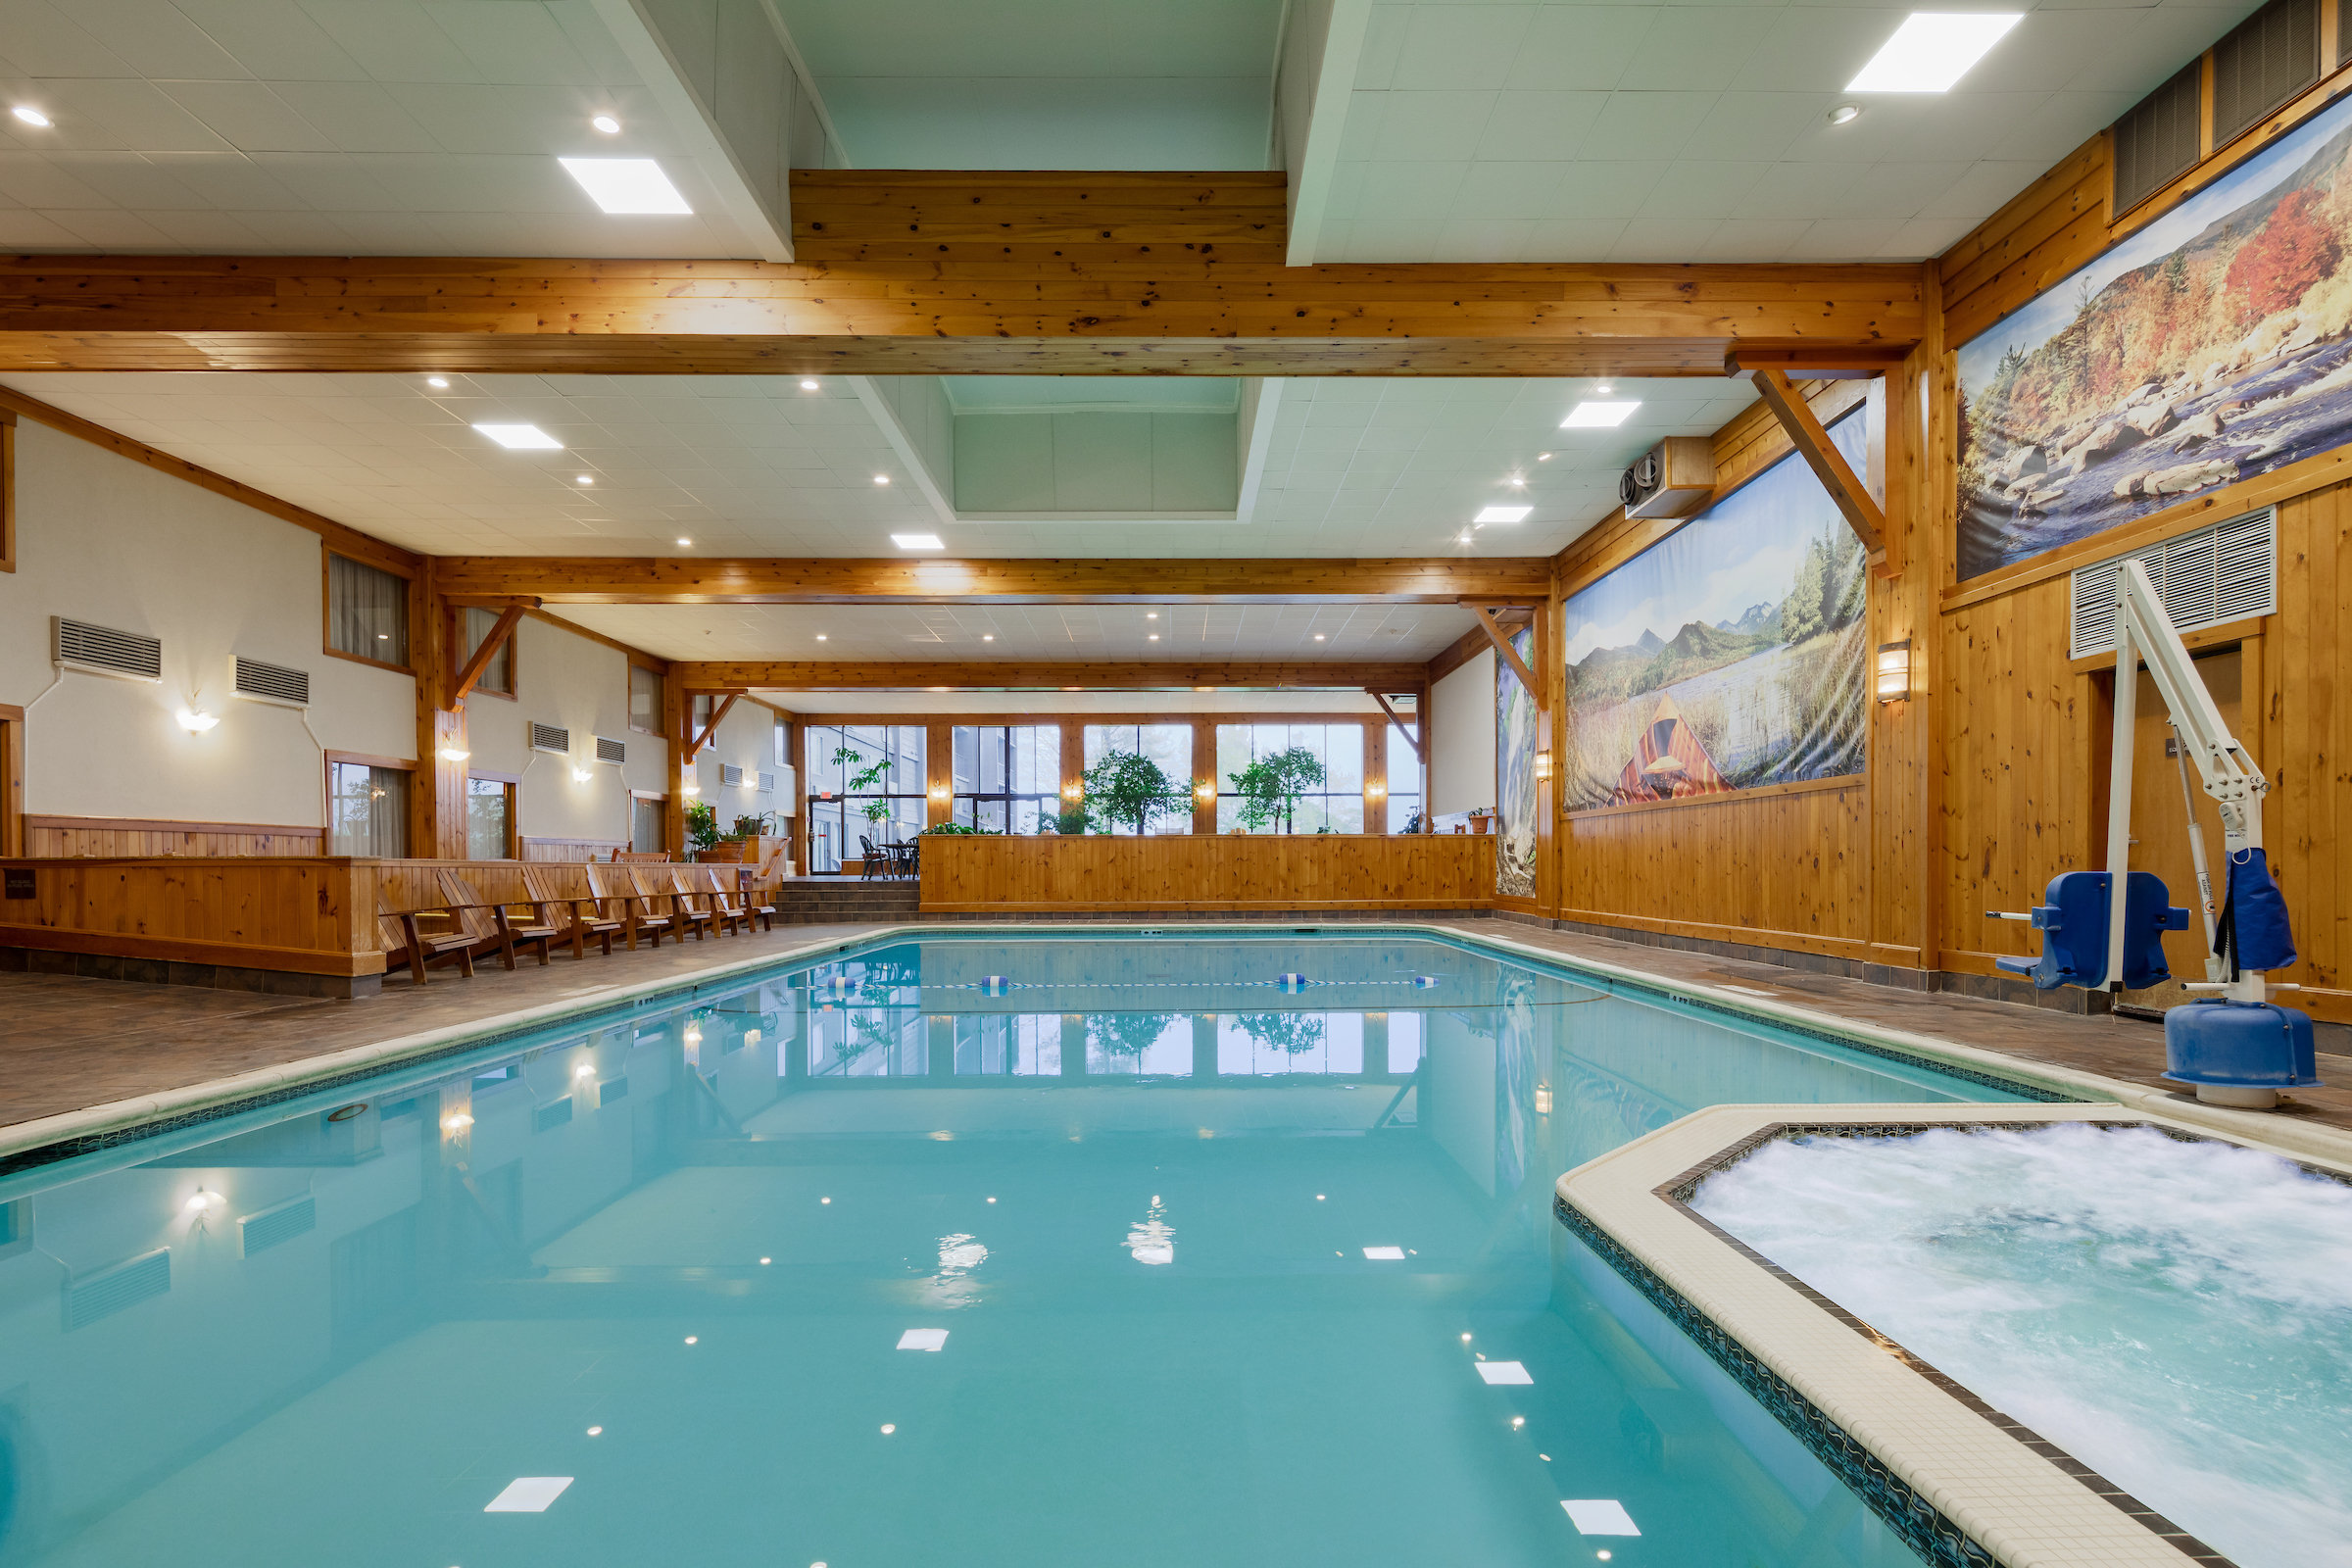 Start the day with a lap in our indoor pool